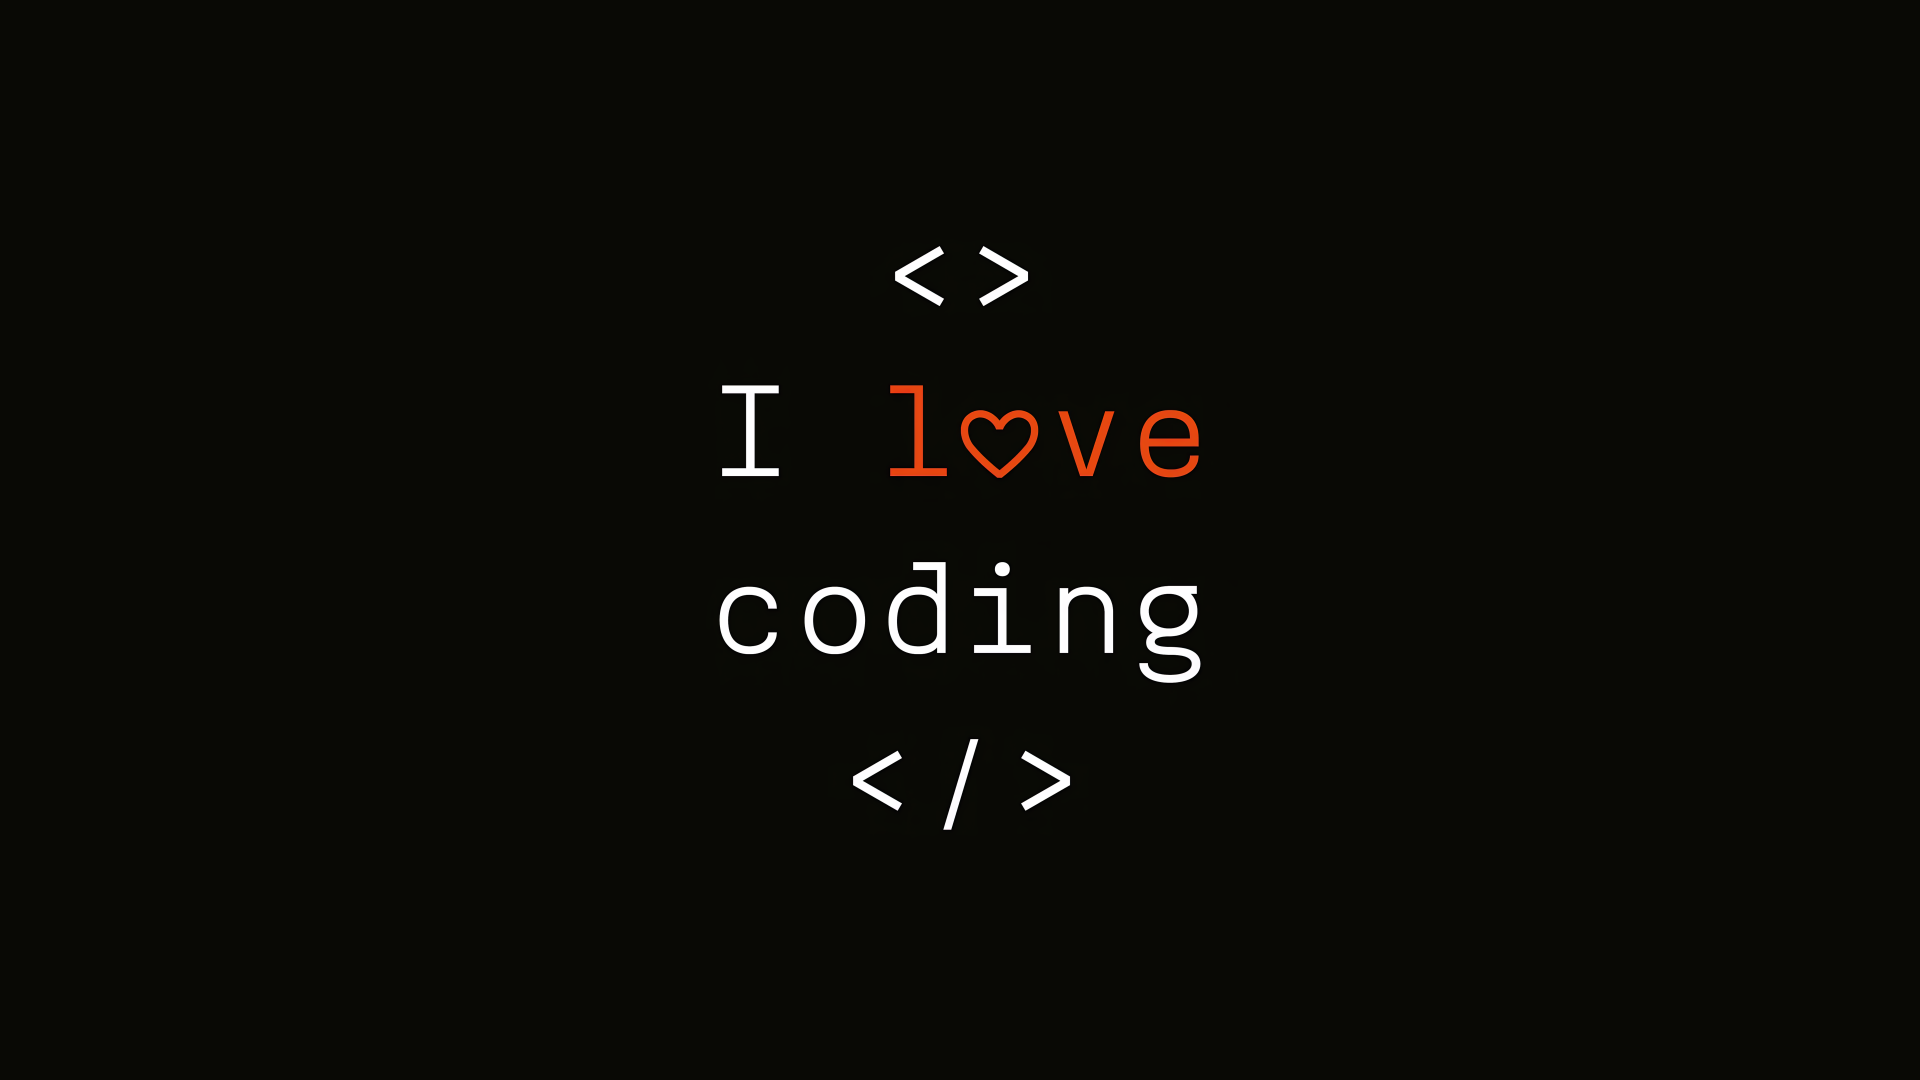 Coding HD wallpapers